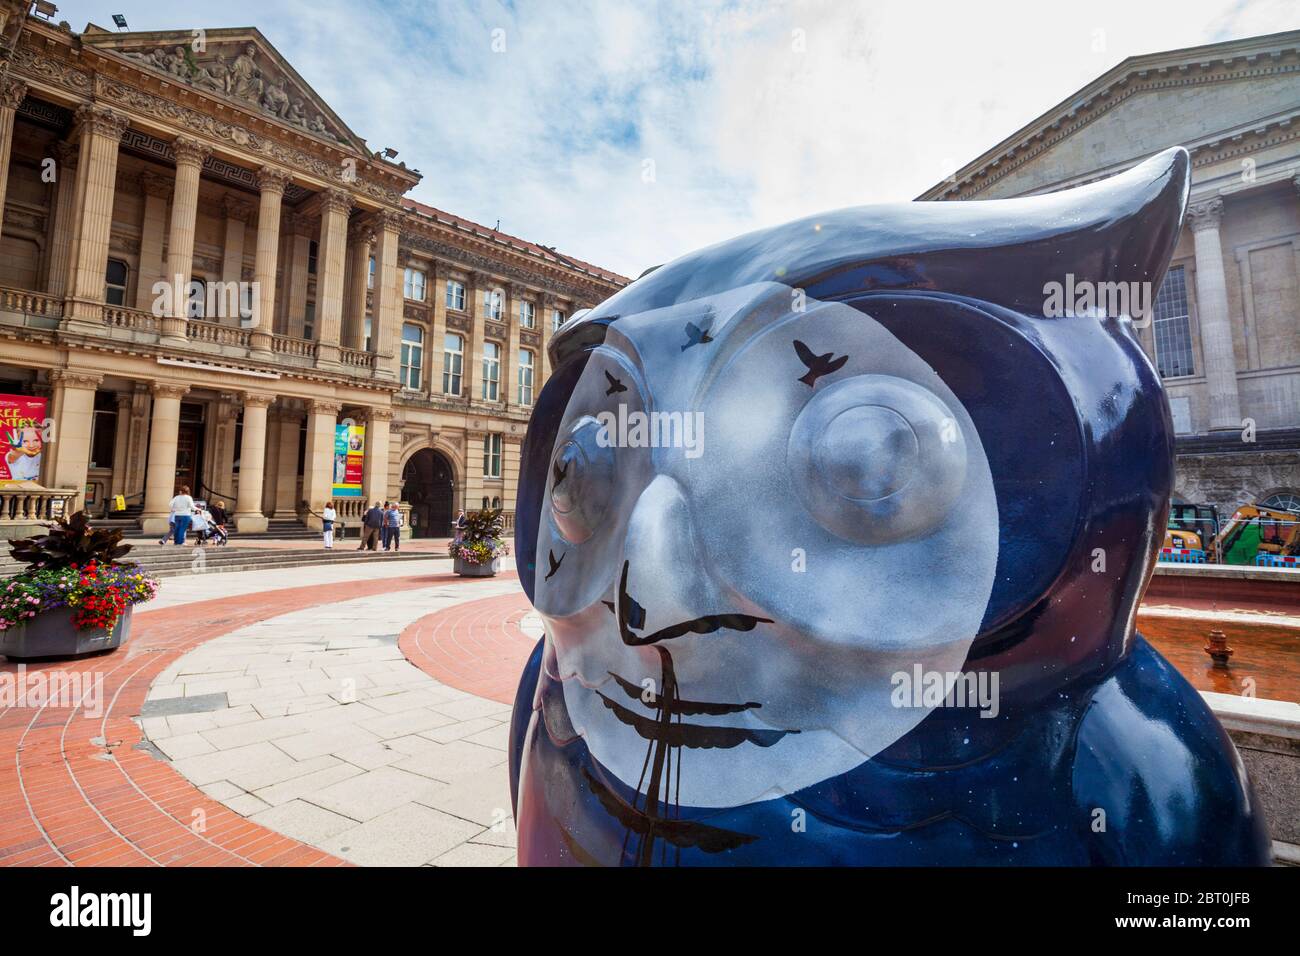 The 'Ship' Owl sculpture outside the Town Hall in Chamberlain Square, part of the Big Hoot Birmingham 2015 Stock Photo